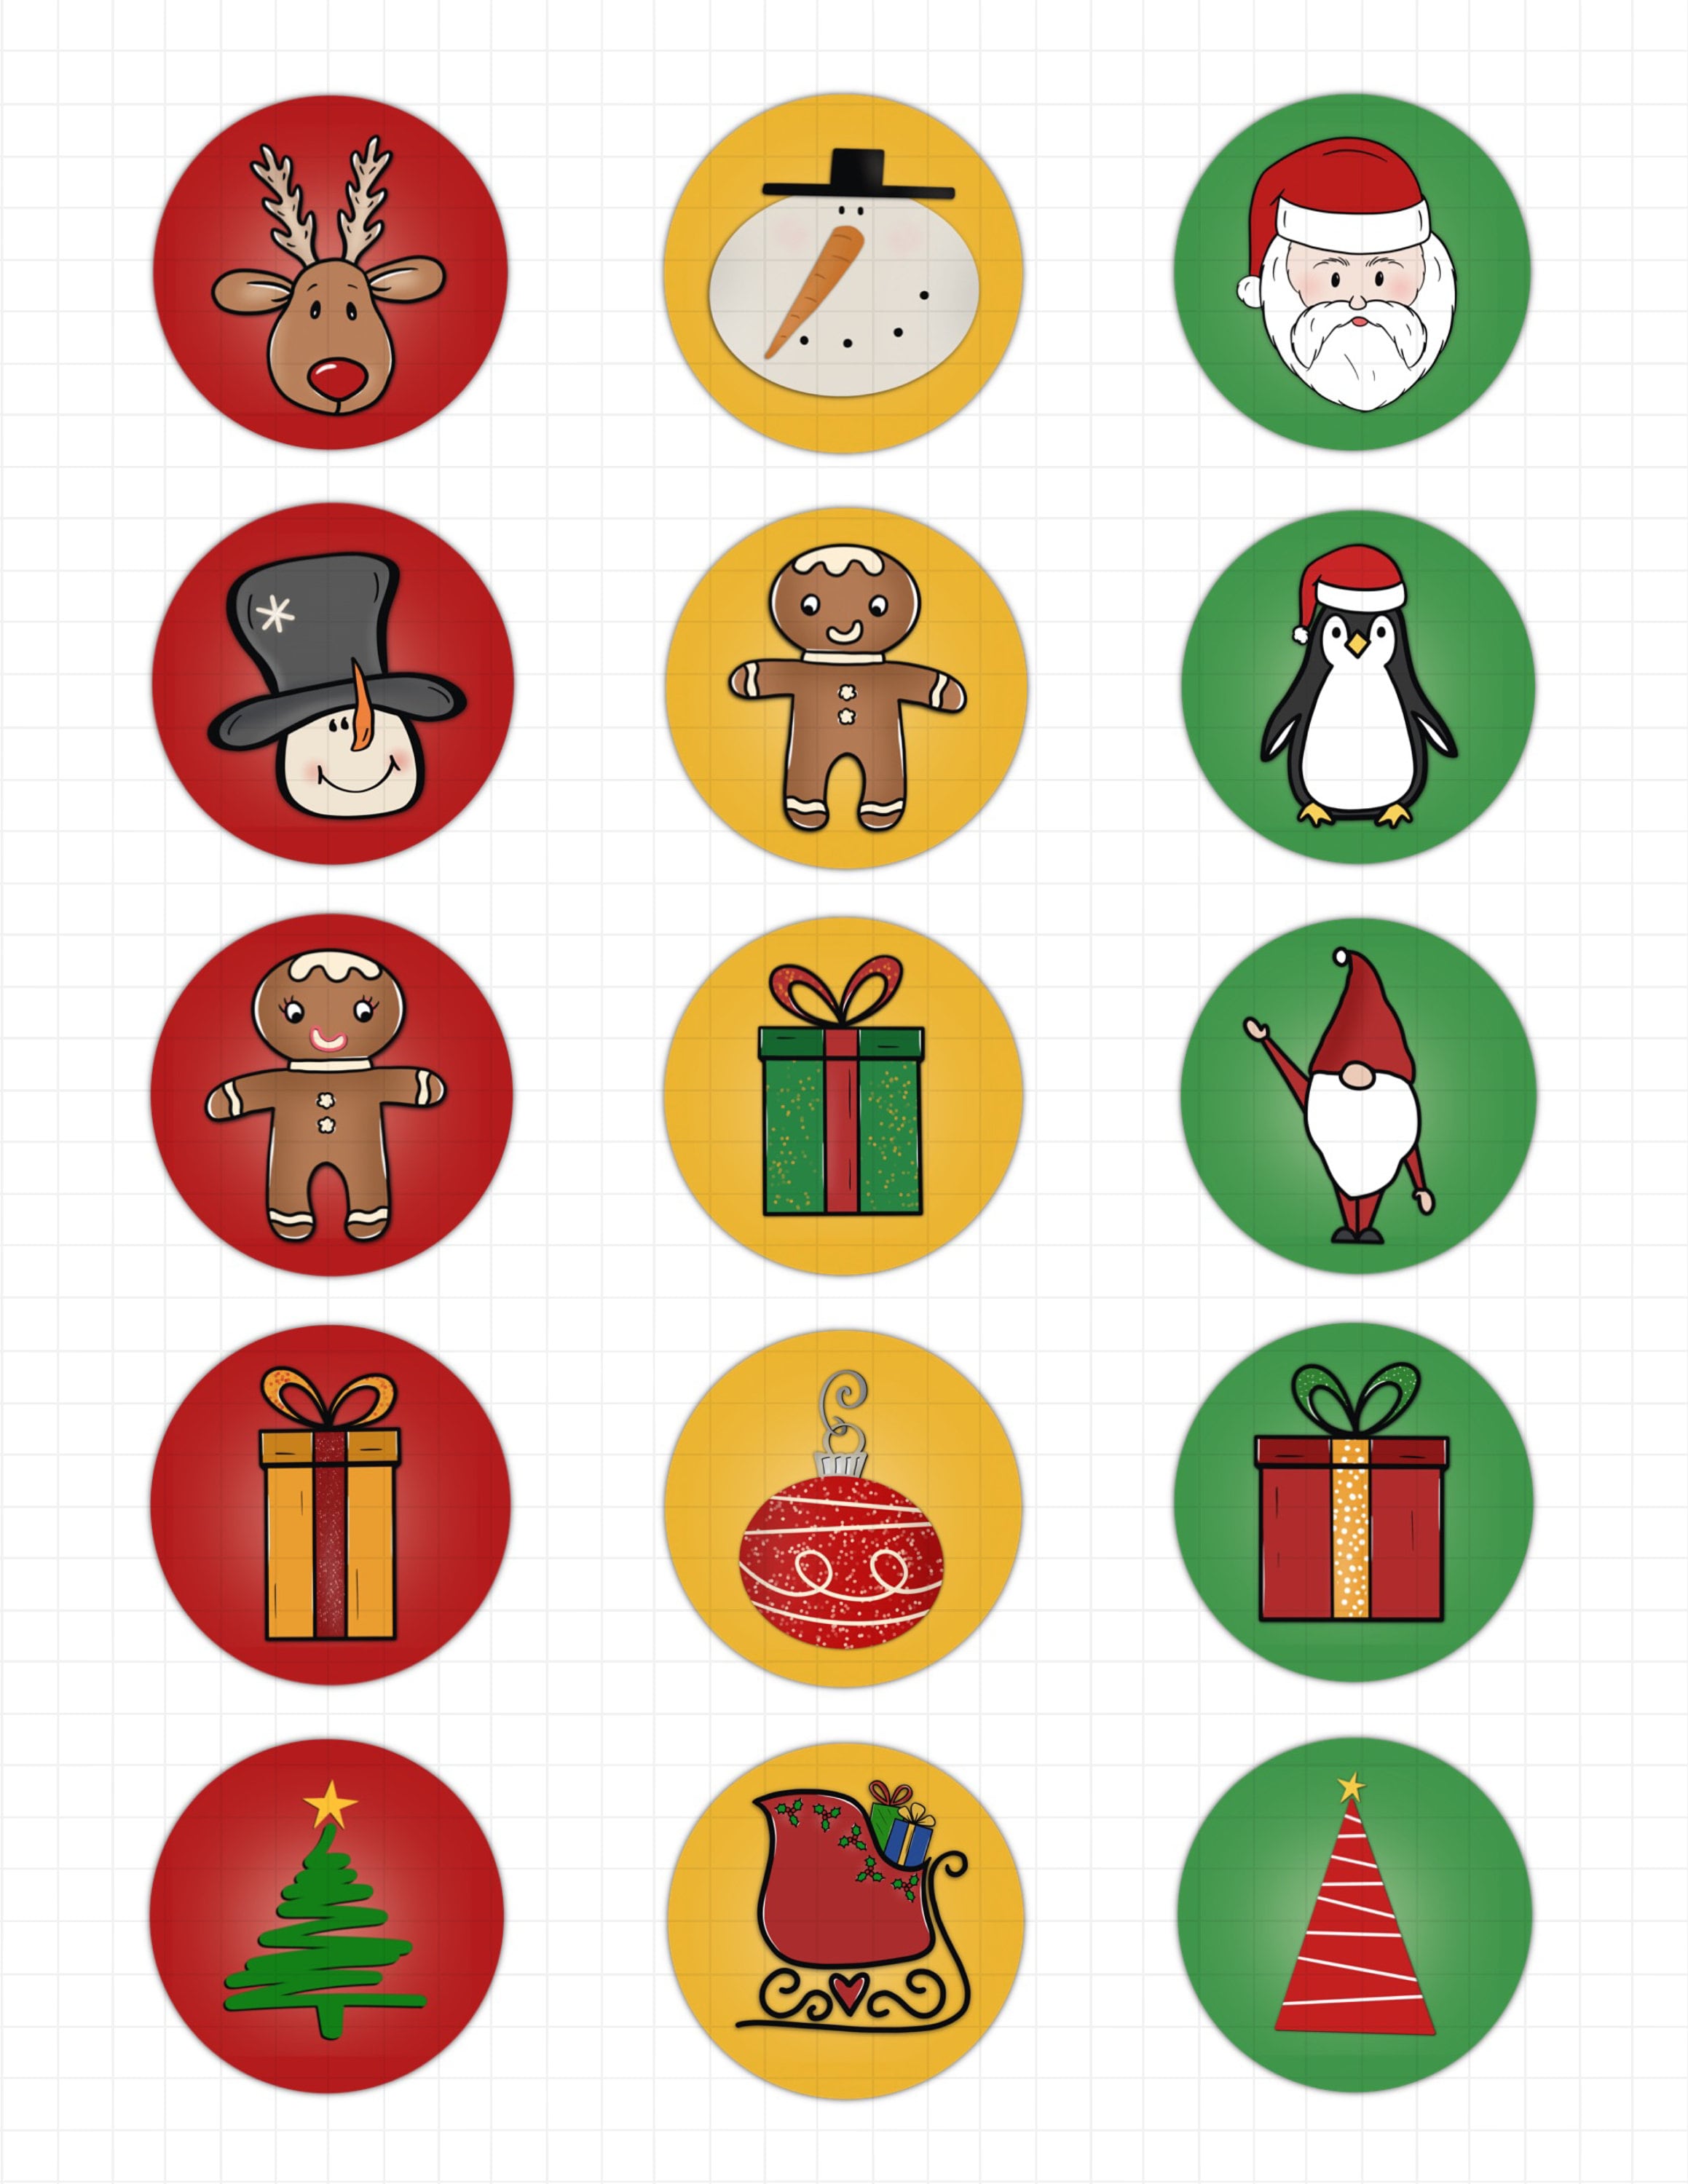 Digital Stickers | HOLIDAY EDITION | Transparent, Pre-cropped | GoodNotes,  Notability, iPad/Tablet | Stickers for Holidays & Occasions